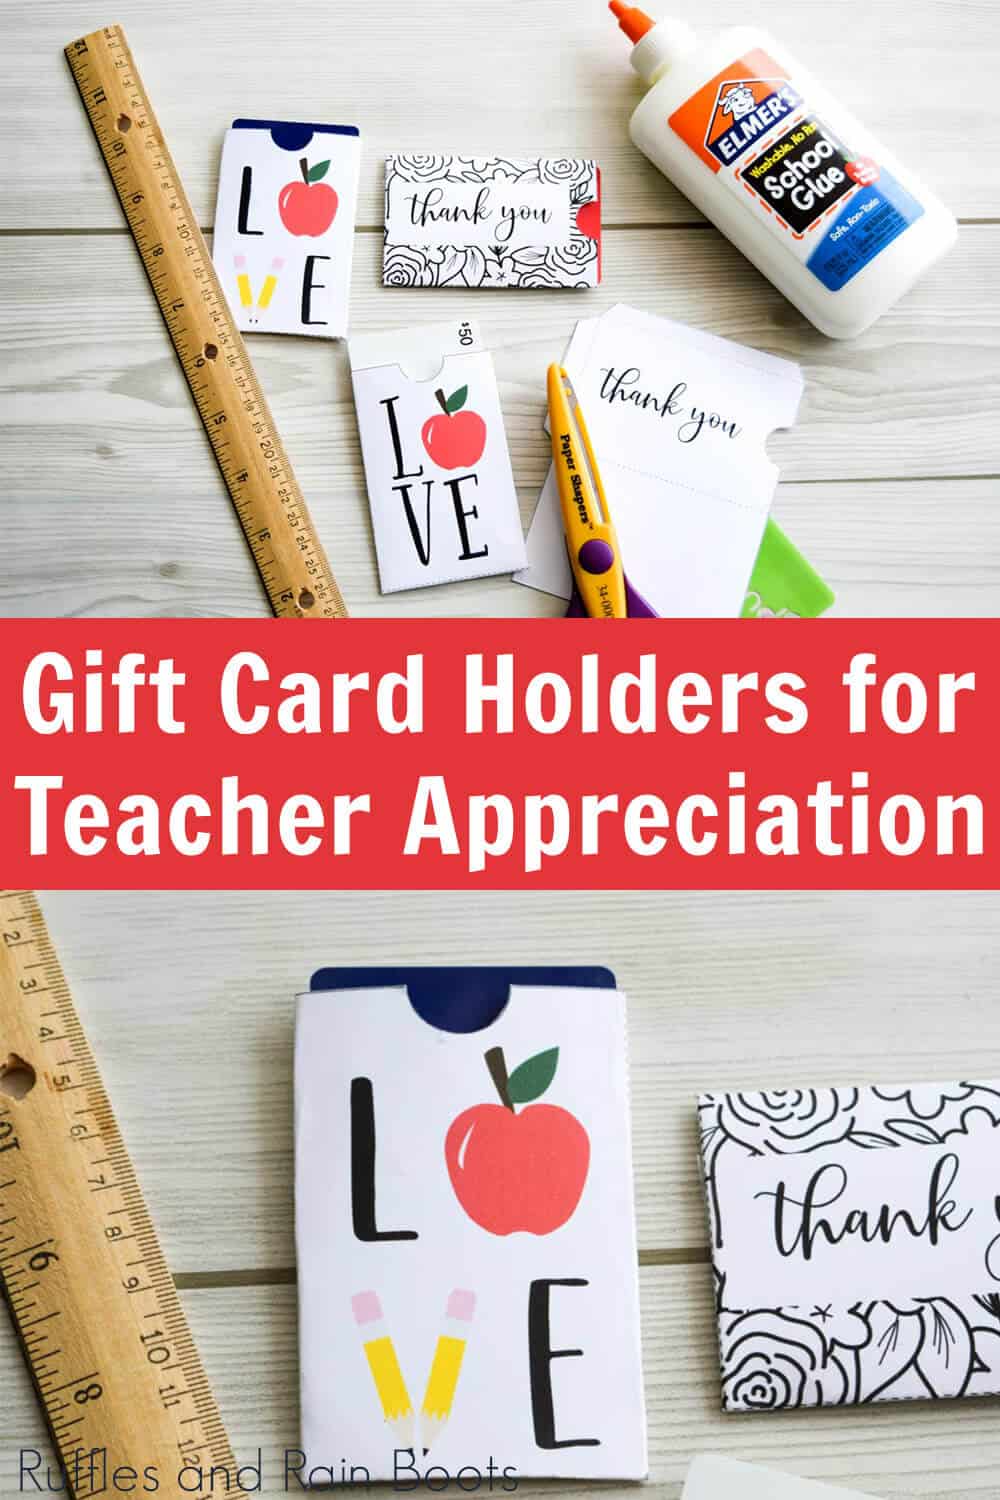 photo collage of gift card holder for teacher appreciation week on wood background